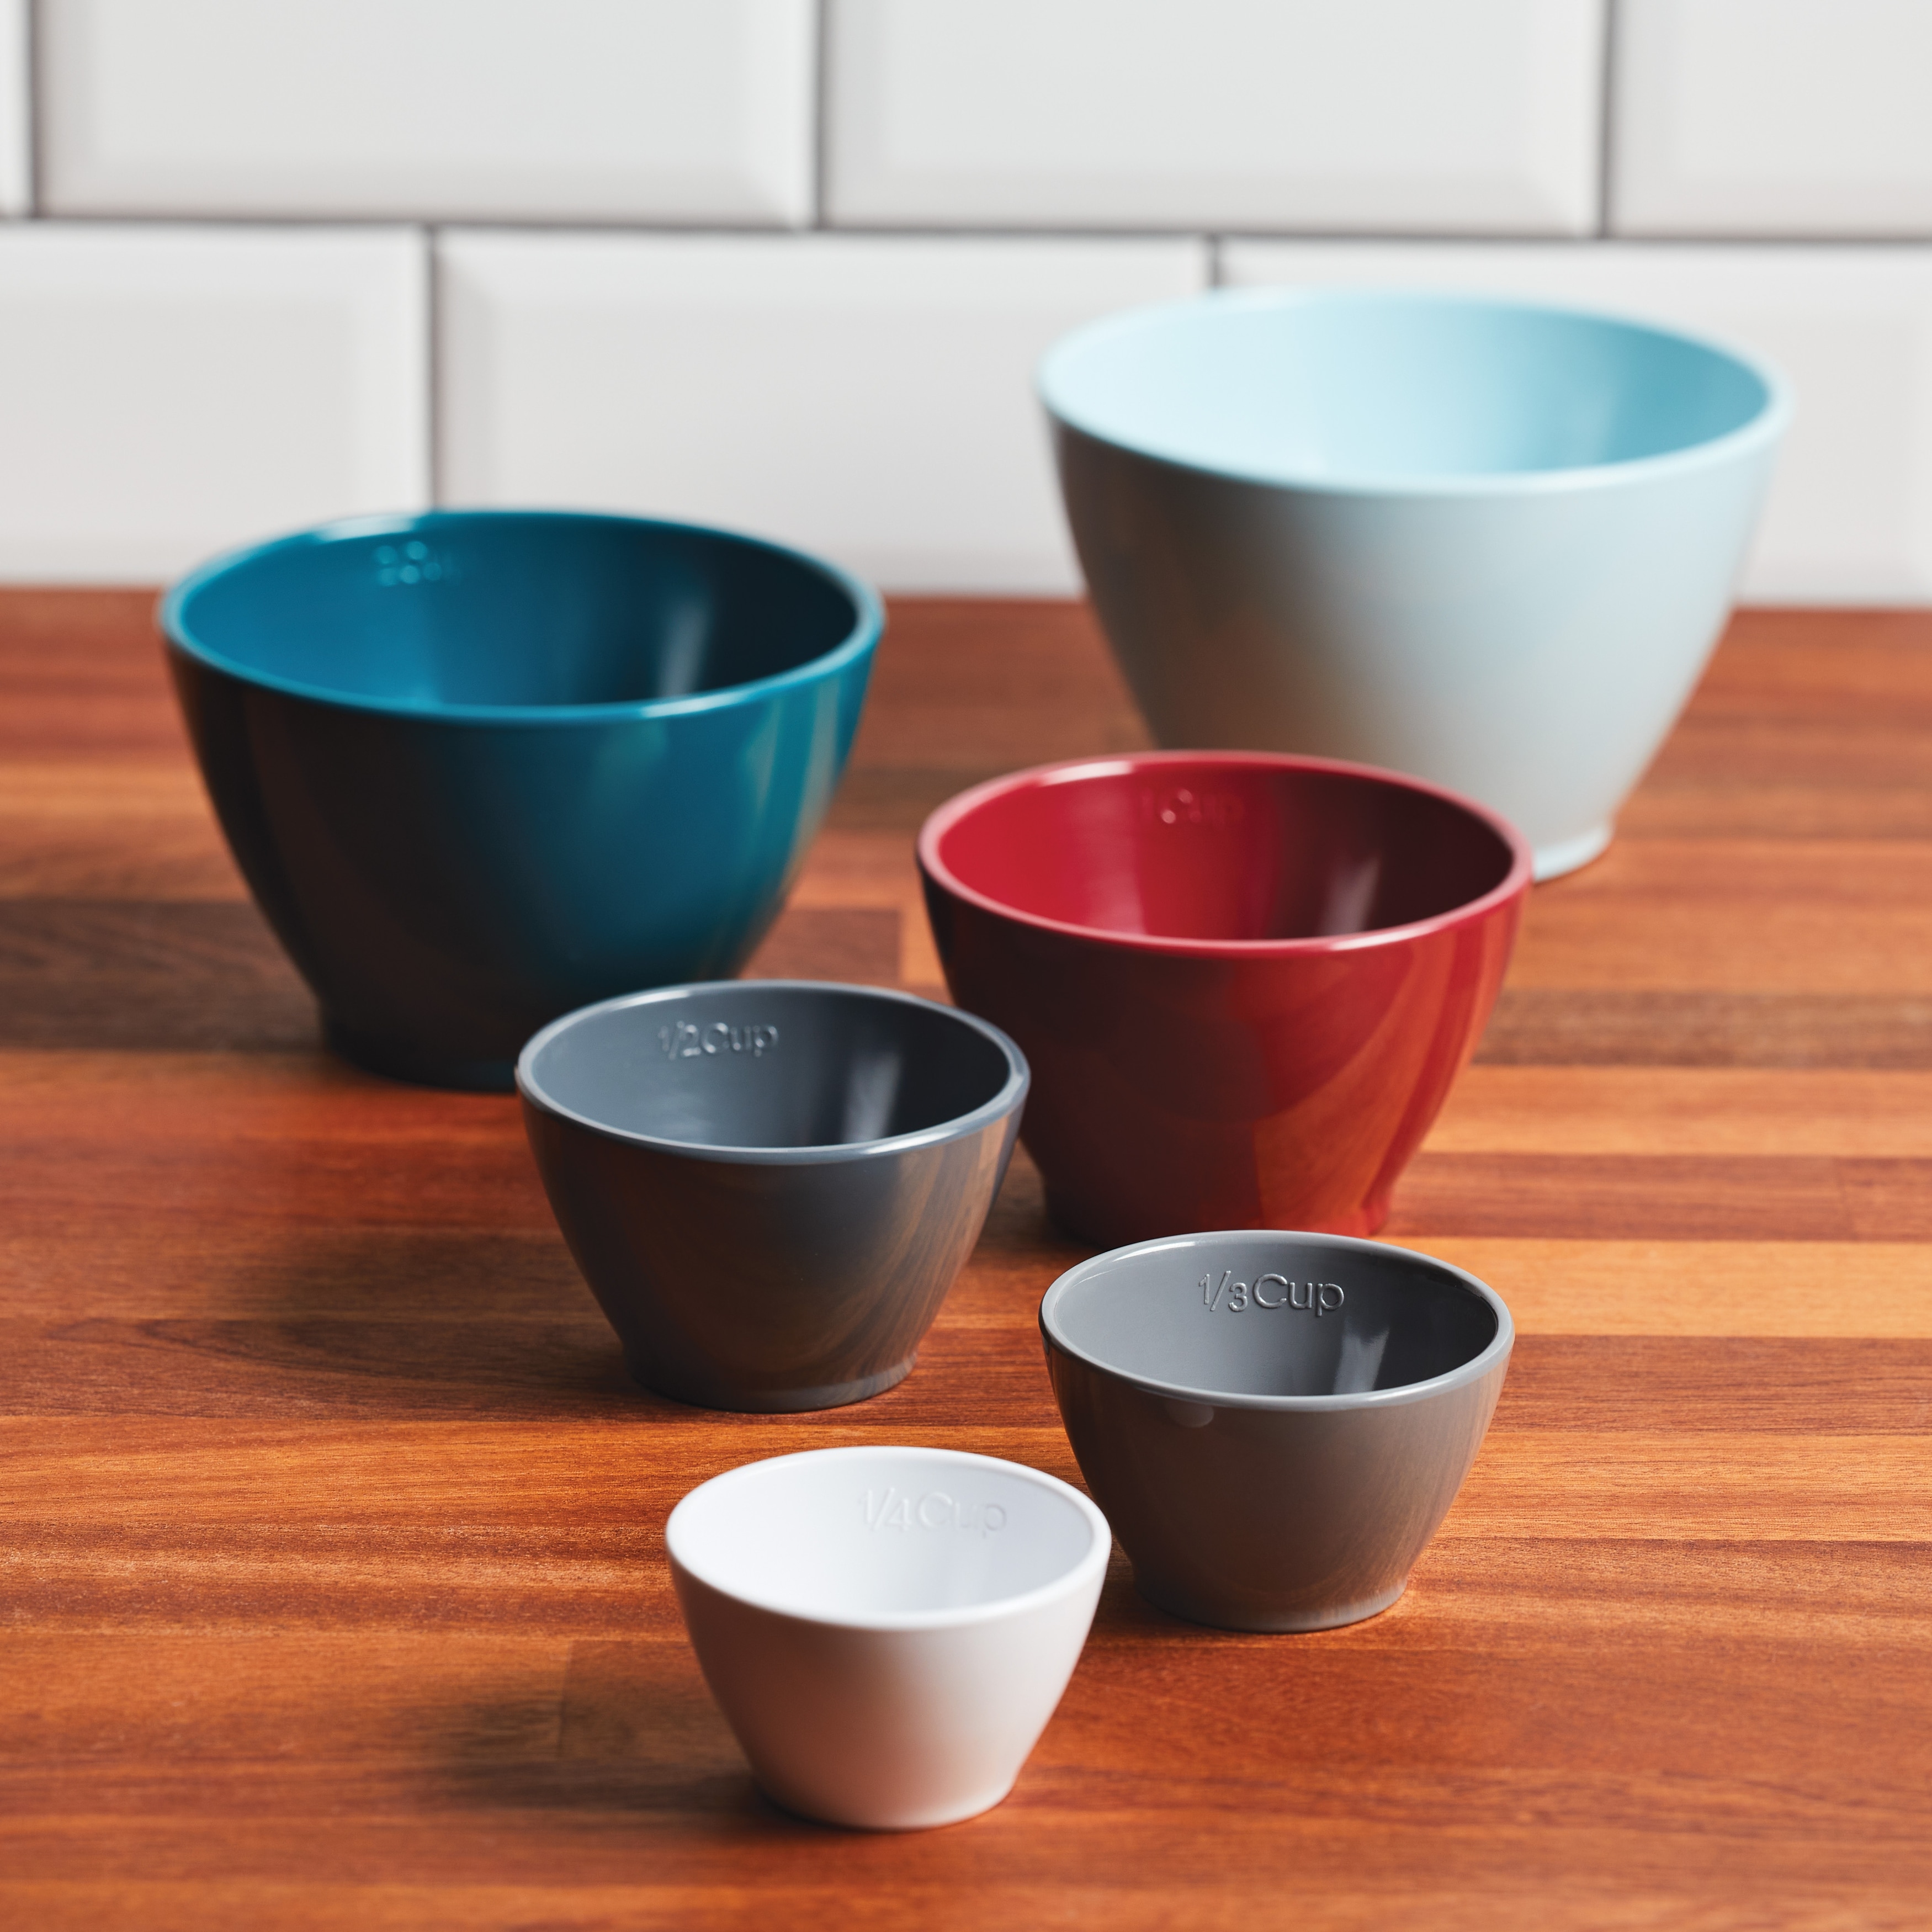 Rachael Ray 5 Pieces Melamine Nesting Measuring Cups, Assorted Colors 